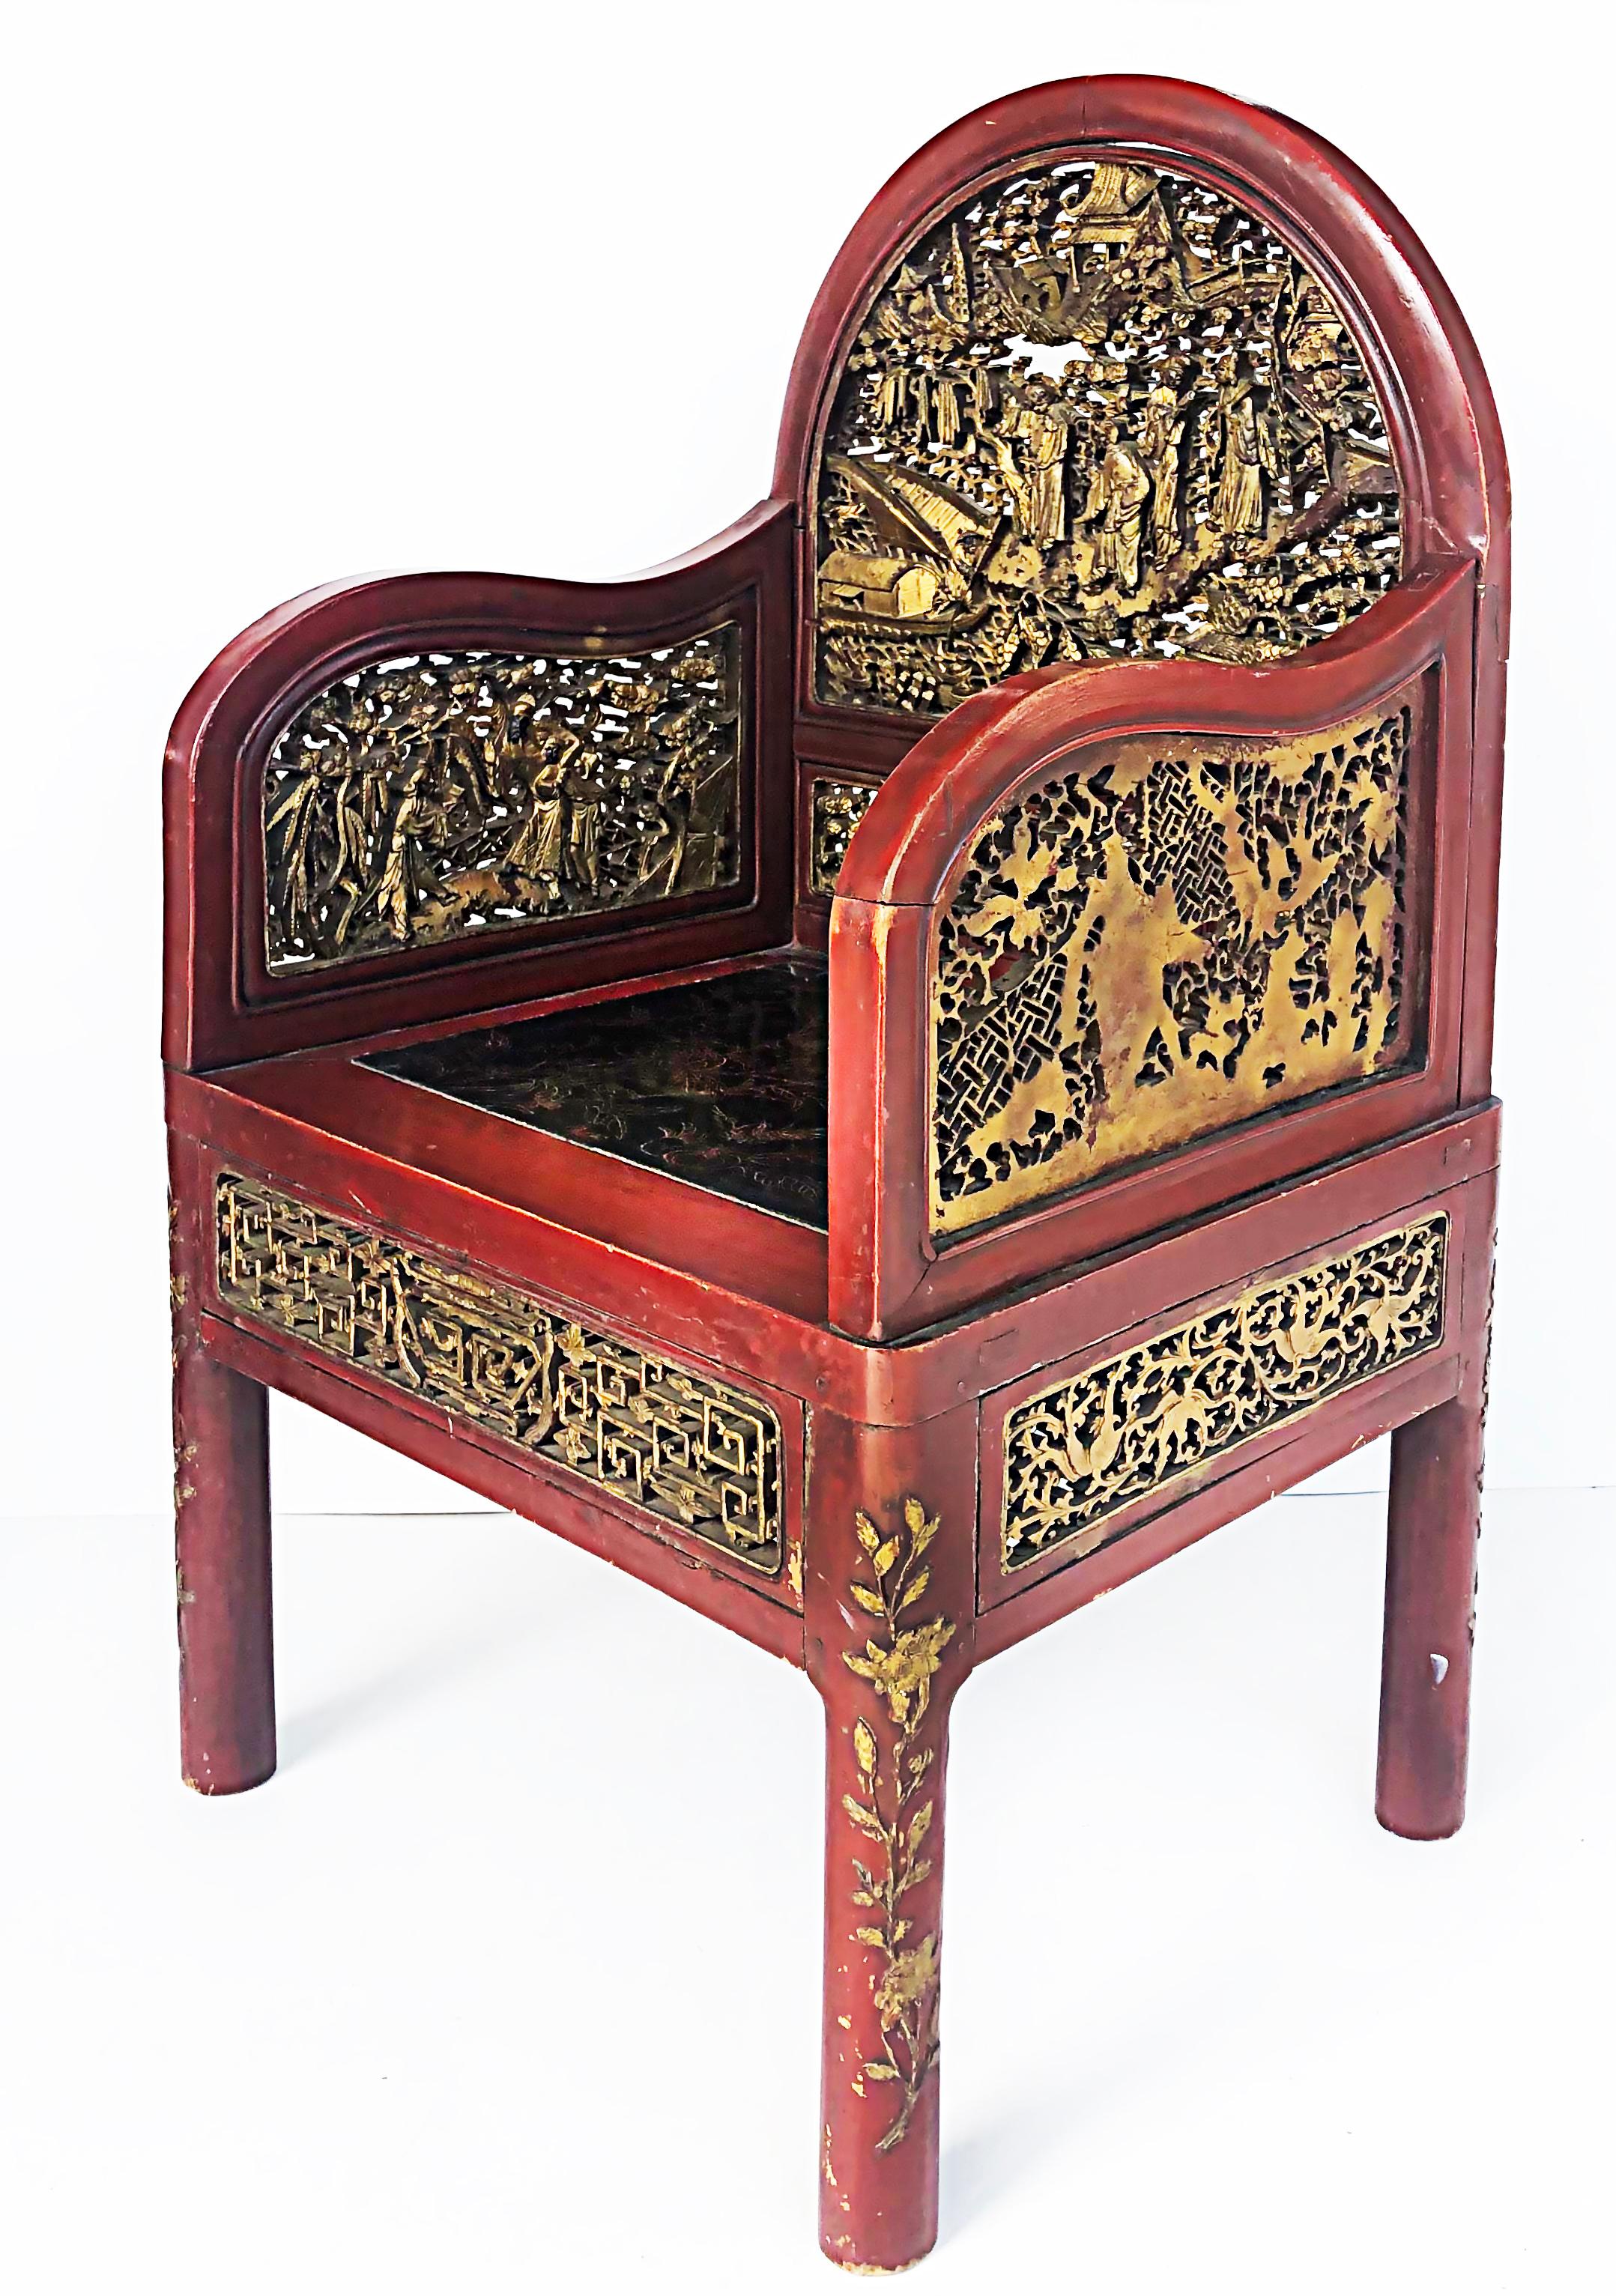 Antique carved Chinese polychrome and gilt armchairs

Offered for sale is a pair of antique early 20th century heavily carved lacquered and gilt armchairs from China. The chairs have totally different scenes carved on the backs and arms. Someone